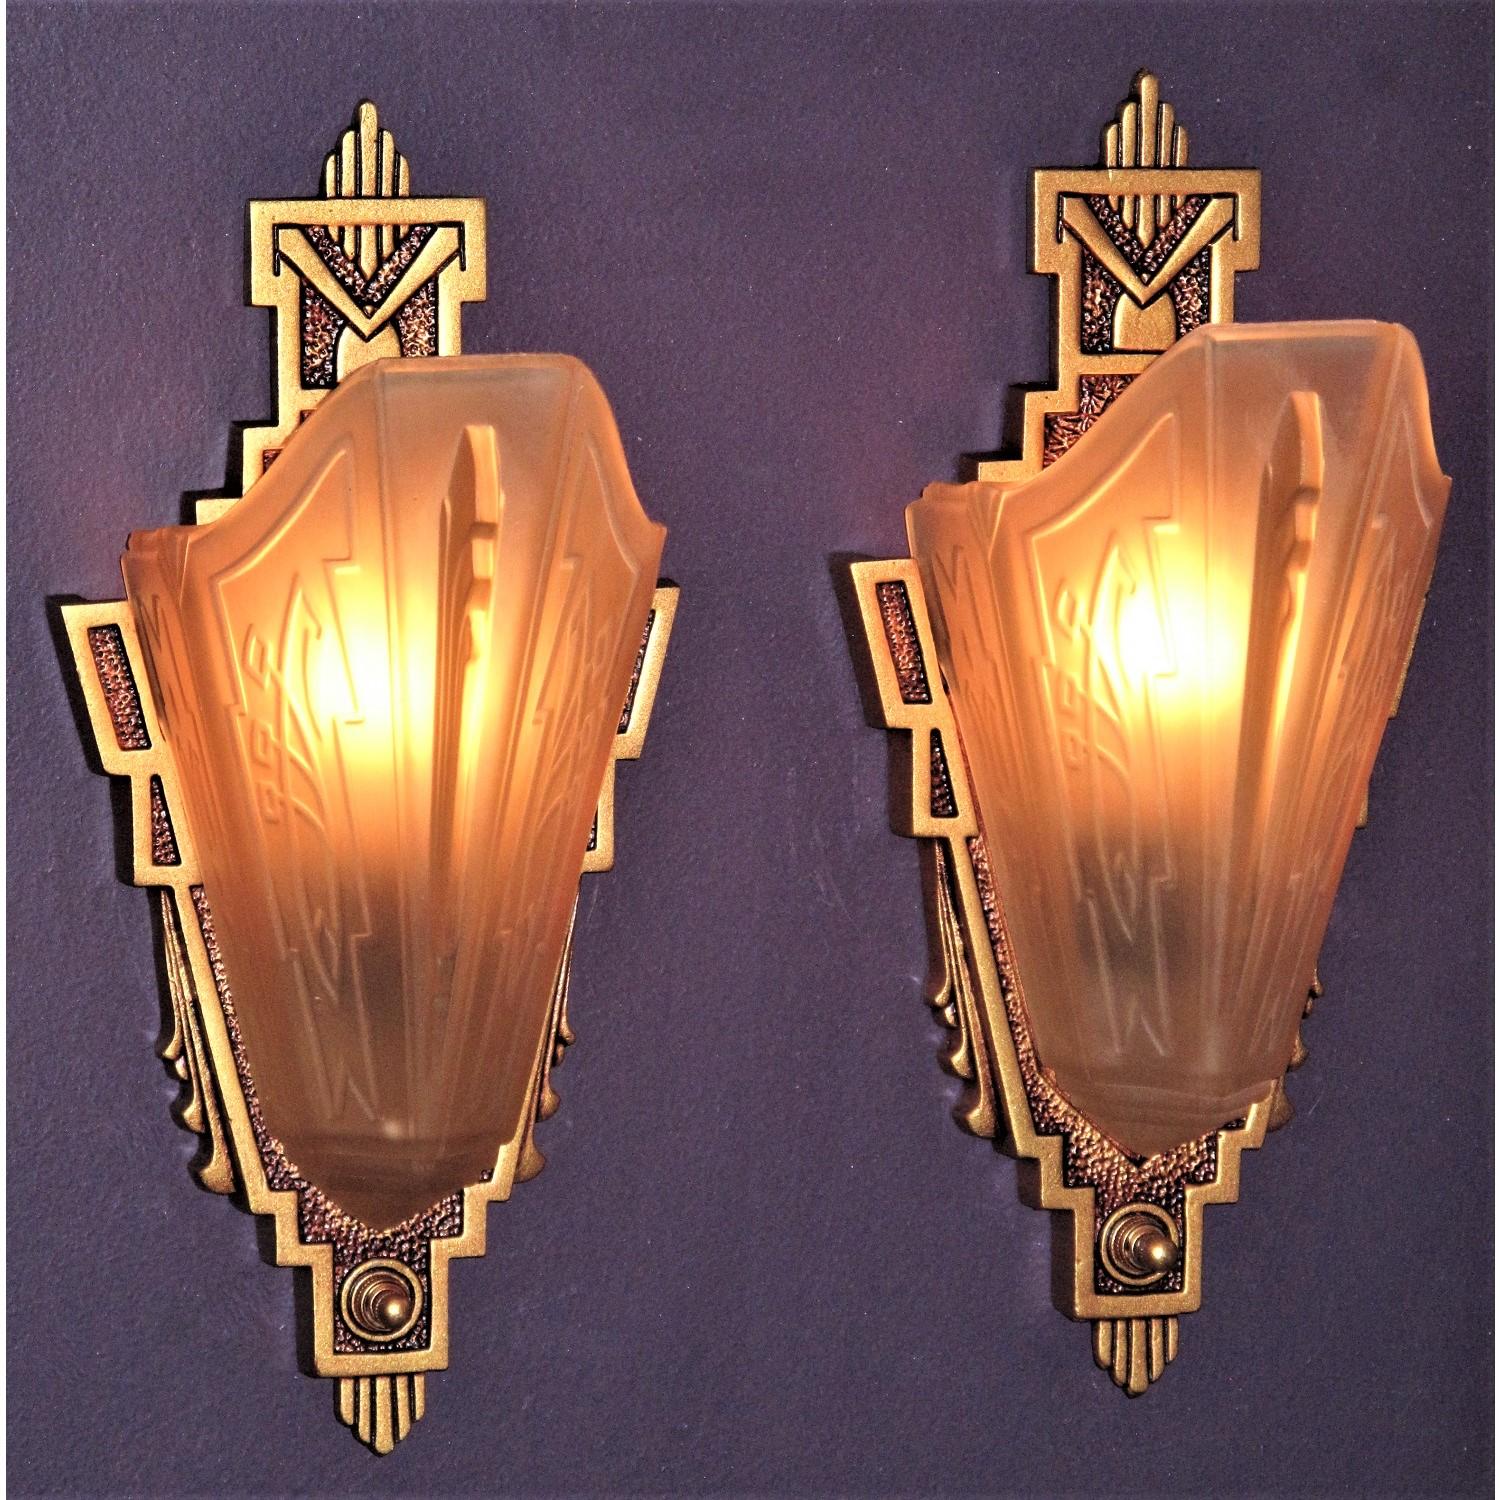 1 Pair available, priced per pair.
Late '20s through mid '30's wall lighting fixtures with a subtle art deco and American Southwest influences. Highly sought after and prized Consolidated Glass Co. shades adorn these refurbished cast iron sconce